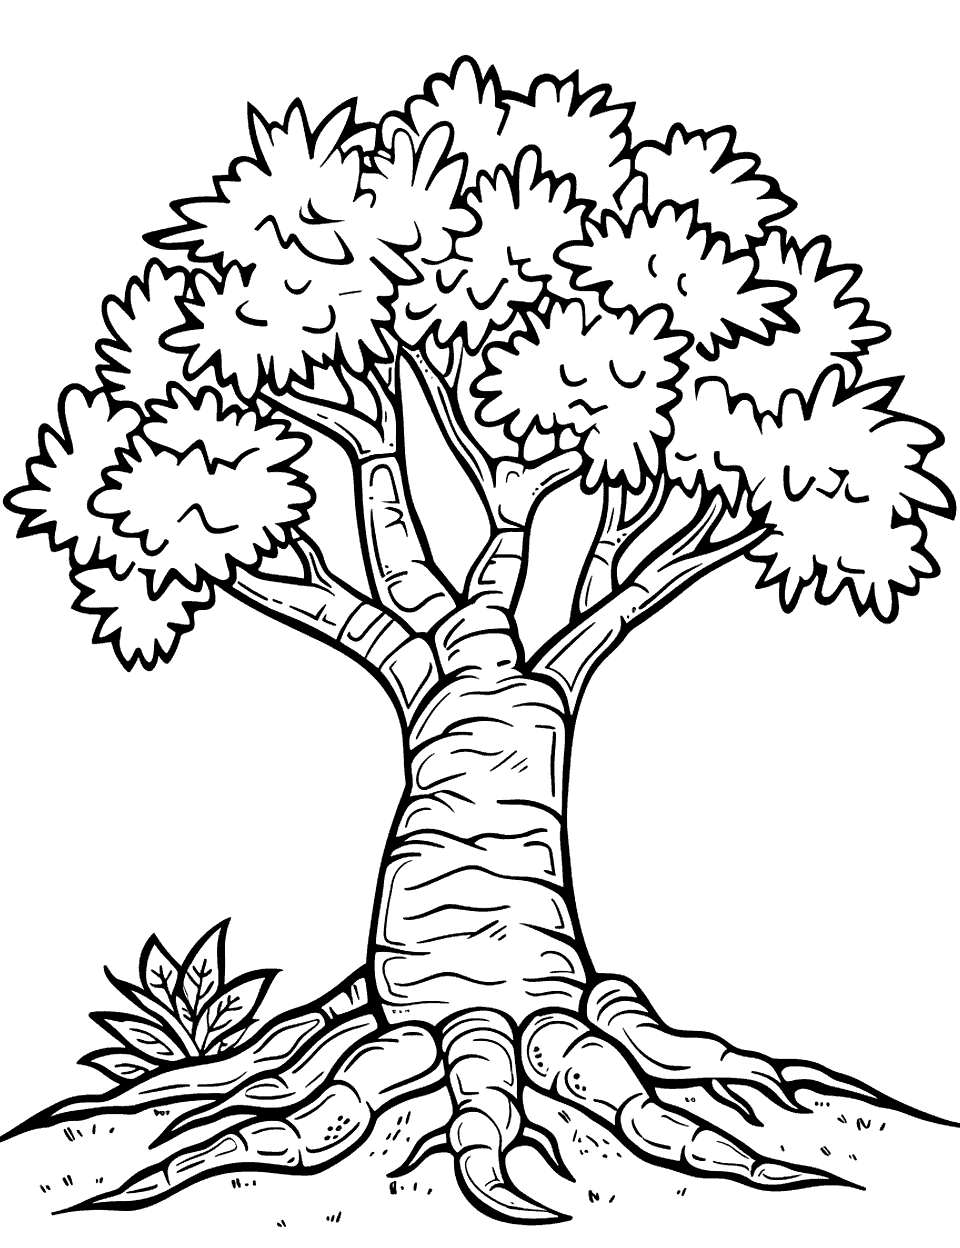 Nature's Majesty Coloring Page - A tree with a wide canopy and roots extending outward, symbolizing strength.